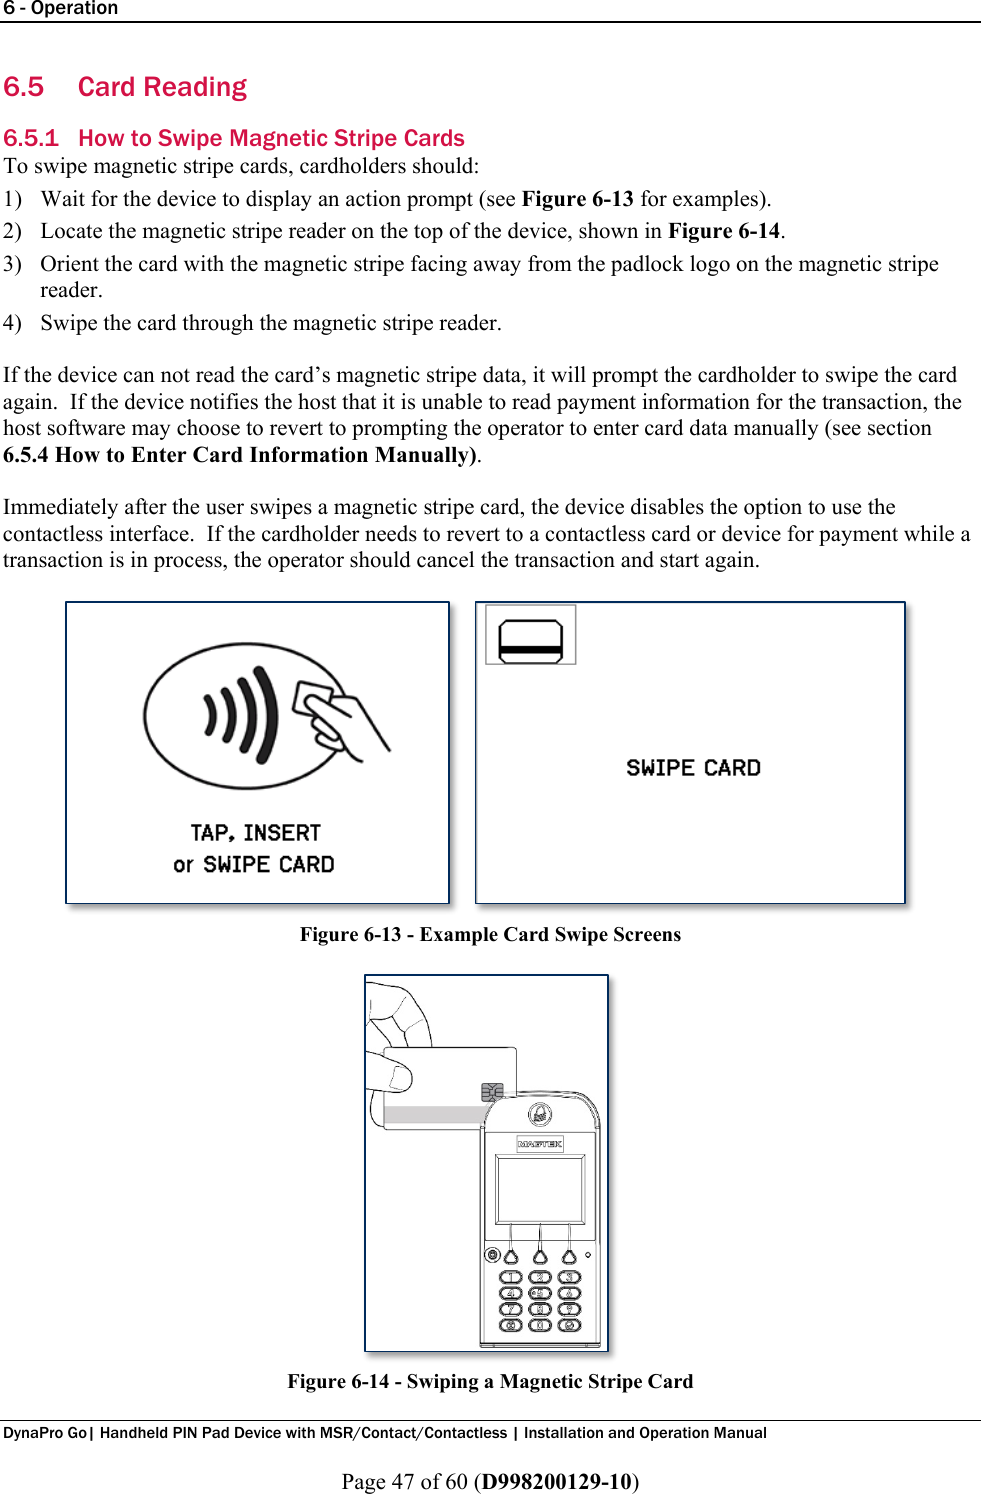 6 - Operation  DynaPro Go| Handheld PIN Pad Device with MSR/Contact/Contactless | Installation and Operation Manual  Page 47 of 60 (D998200129-10) 6.5 Card Reading 6.5.1 How to Swipe Magnetic Stripe Cards To swipe magnetic stripe cards, cardholders should: 1) Wait for the device to display an action prompt (see Figure 6-13 for examples). 2) Locate the magnetic stripe reader on the top of the device, shown in Figure 6-14. 3) Orient the card with the magnetic stripe facing away from the padlock logo on the magnetic stripe reader. 4) Swipe the card through the magnetic stripe reader.  If the device can not read the card’s magnetic stripe data, it will prompt the cardholder to swipe the card again.  If the device notifies the host that it is unable to read payment information for the transaction, the host software may choose to revert to prompting the operator to enter card data manually (see section 6.5.4 How to Enter Card Information Manually).  Immediately after the user swipes a magnetic stripe card, the device disables the option to use the contactless interface.  If the cardholder needs to revert to a contactless card or device for payment while a transaction is in process, the operator should cancel the transaction and start again.  Figure 6-13 - Example Card Swipe Screens  Figure 6-14 - Swiping a Magnetic Stripe Card   